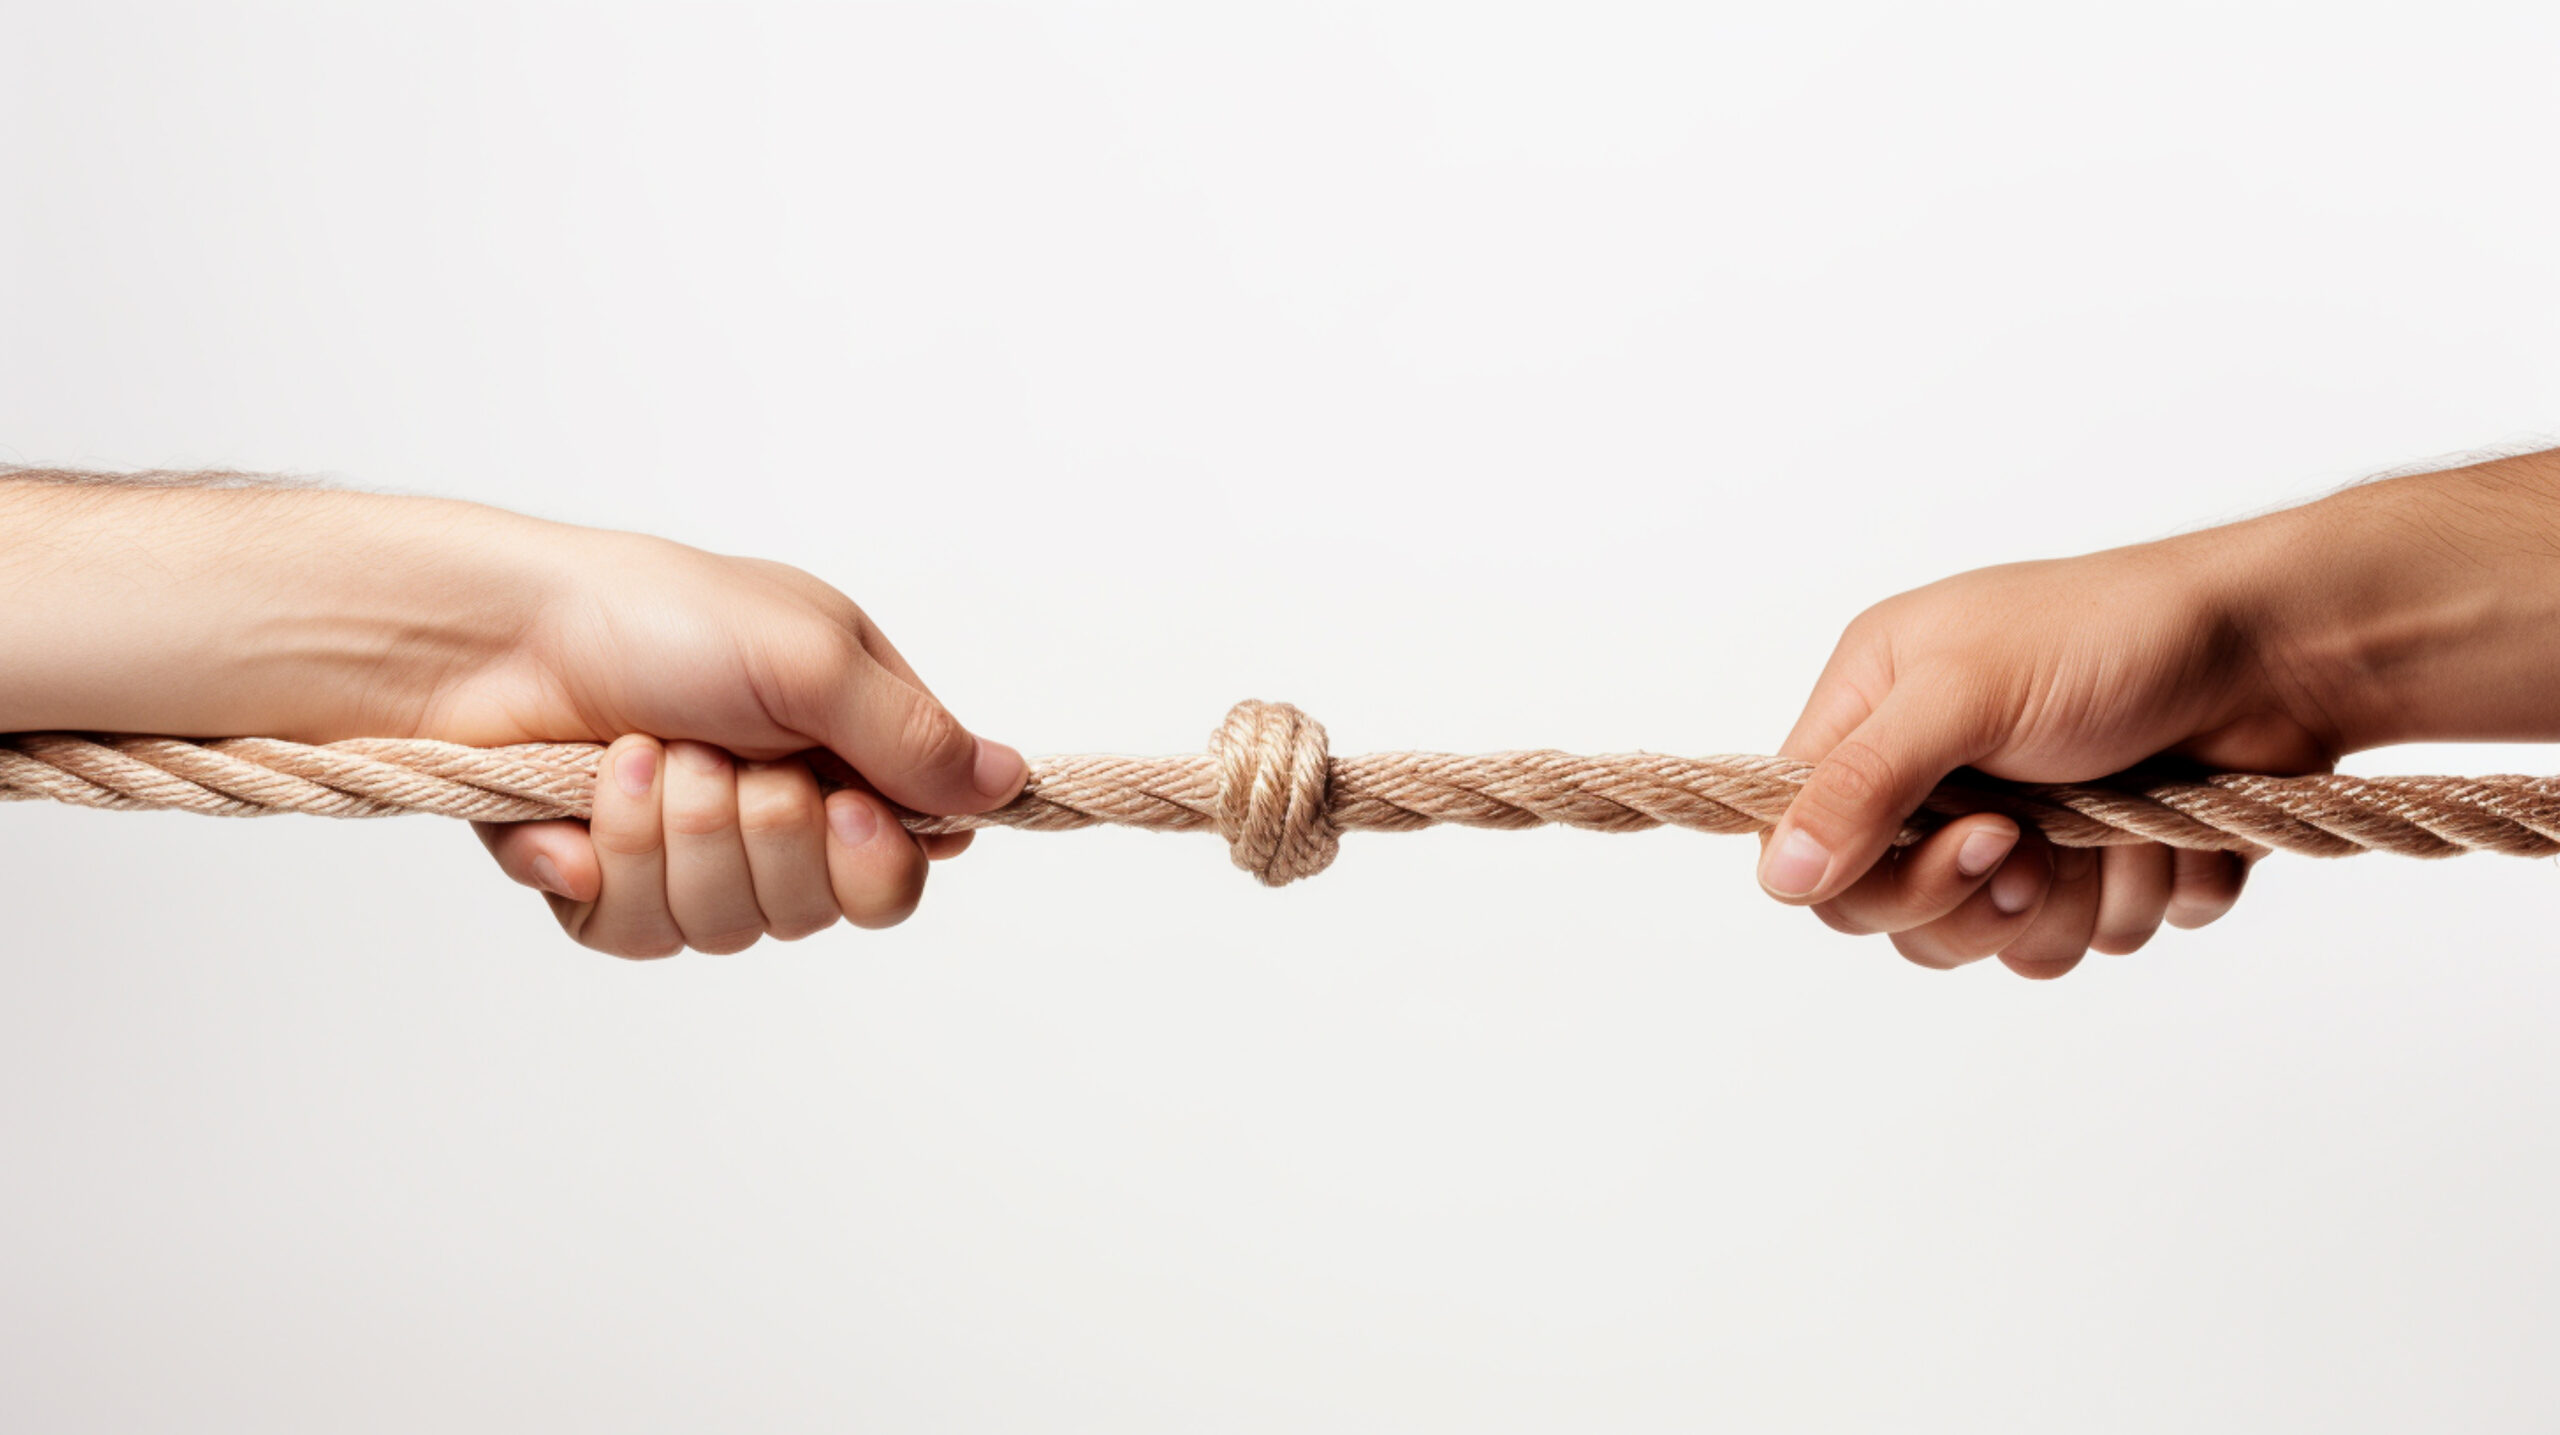 The Tech Talent Tug-of-War: Life Sciences vs. Traditional Tech